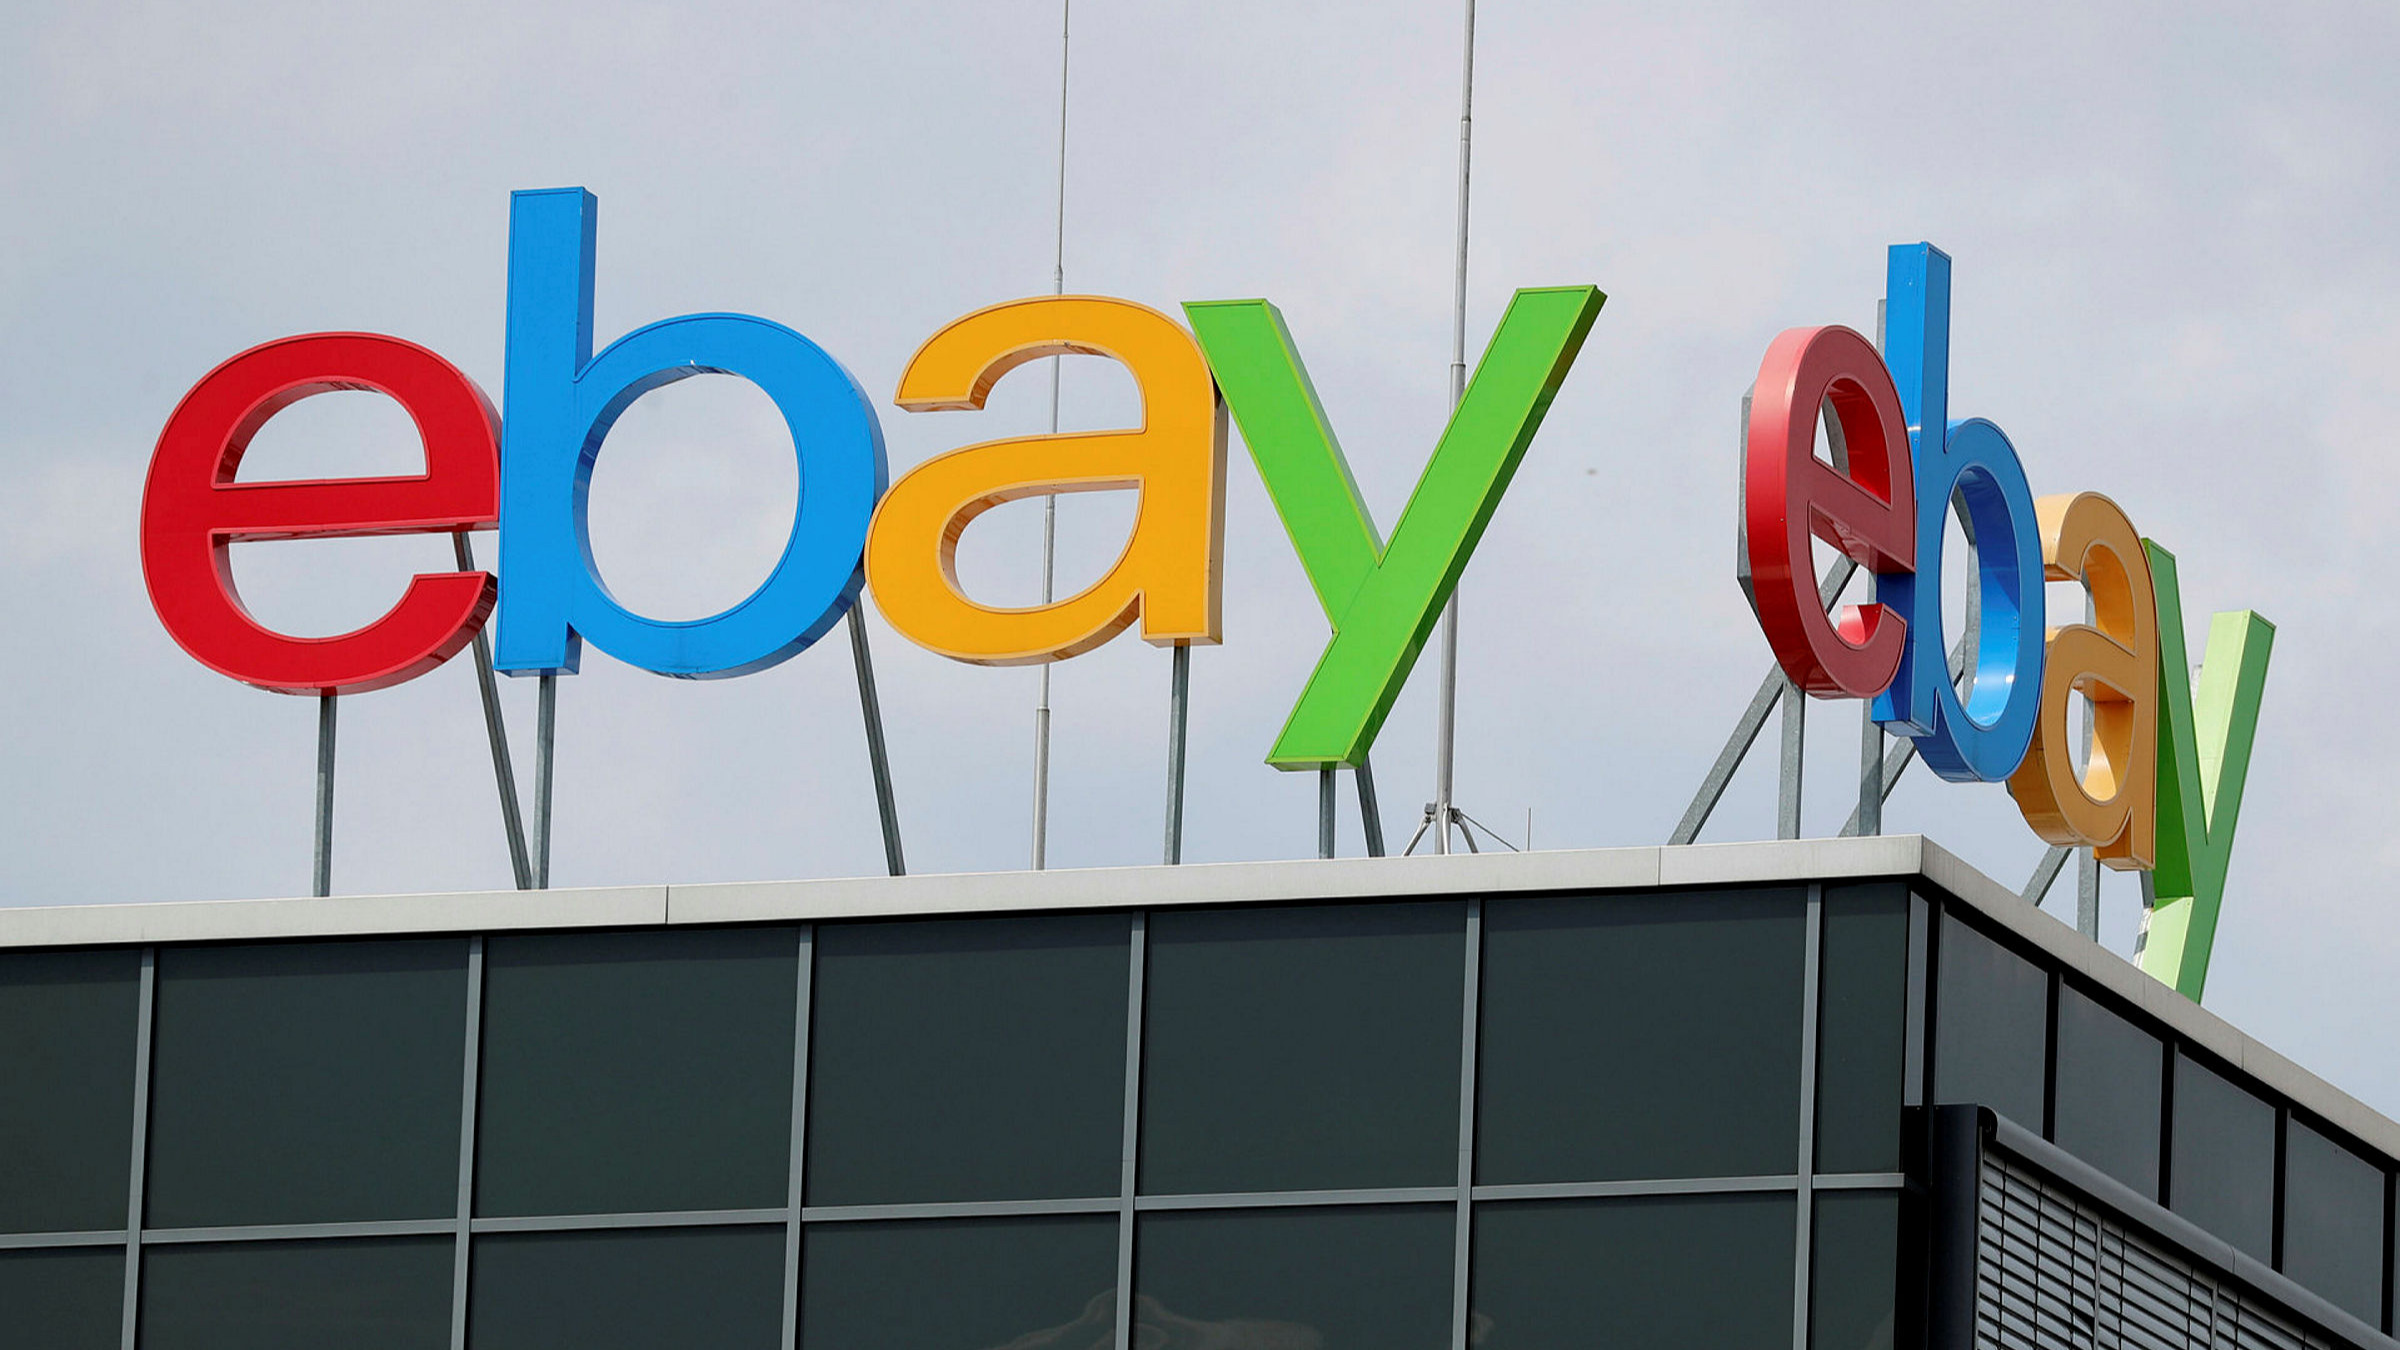 Ebay And Adevinta Offer To Sell Uk Classifieds Sites To Win Approval For Merger Financial Times